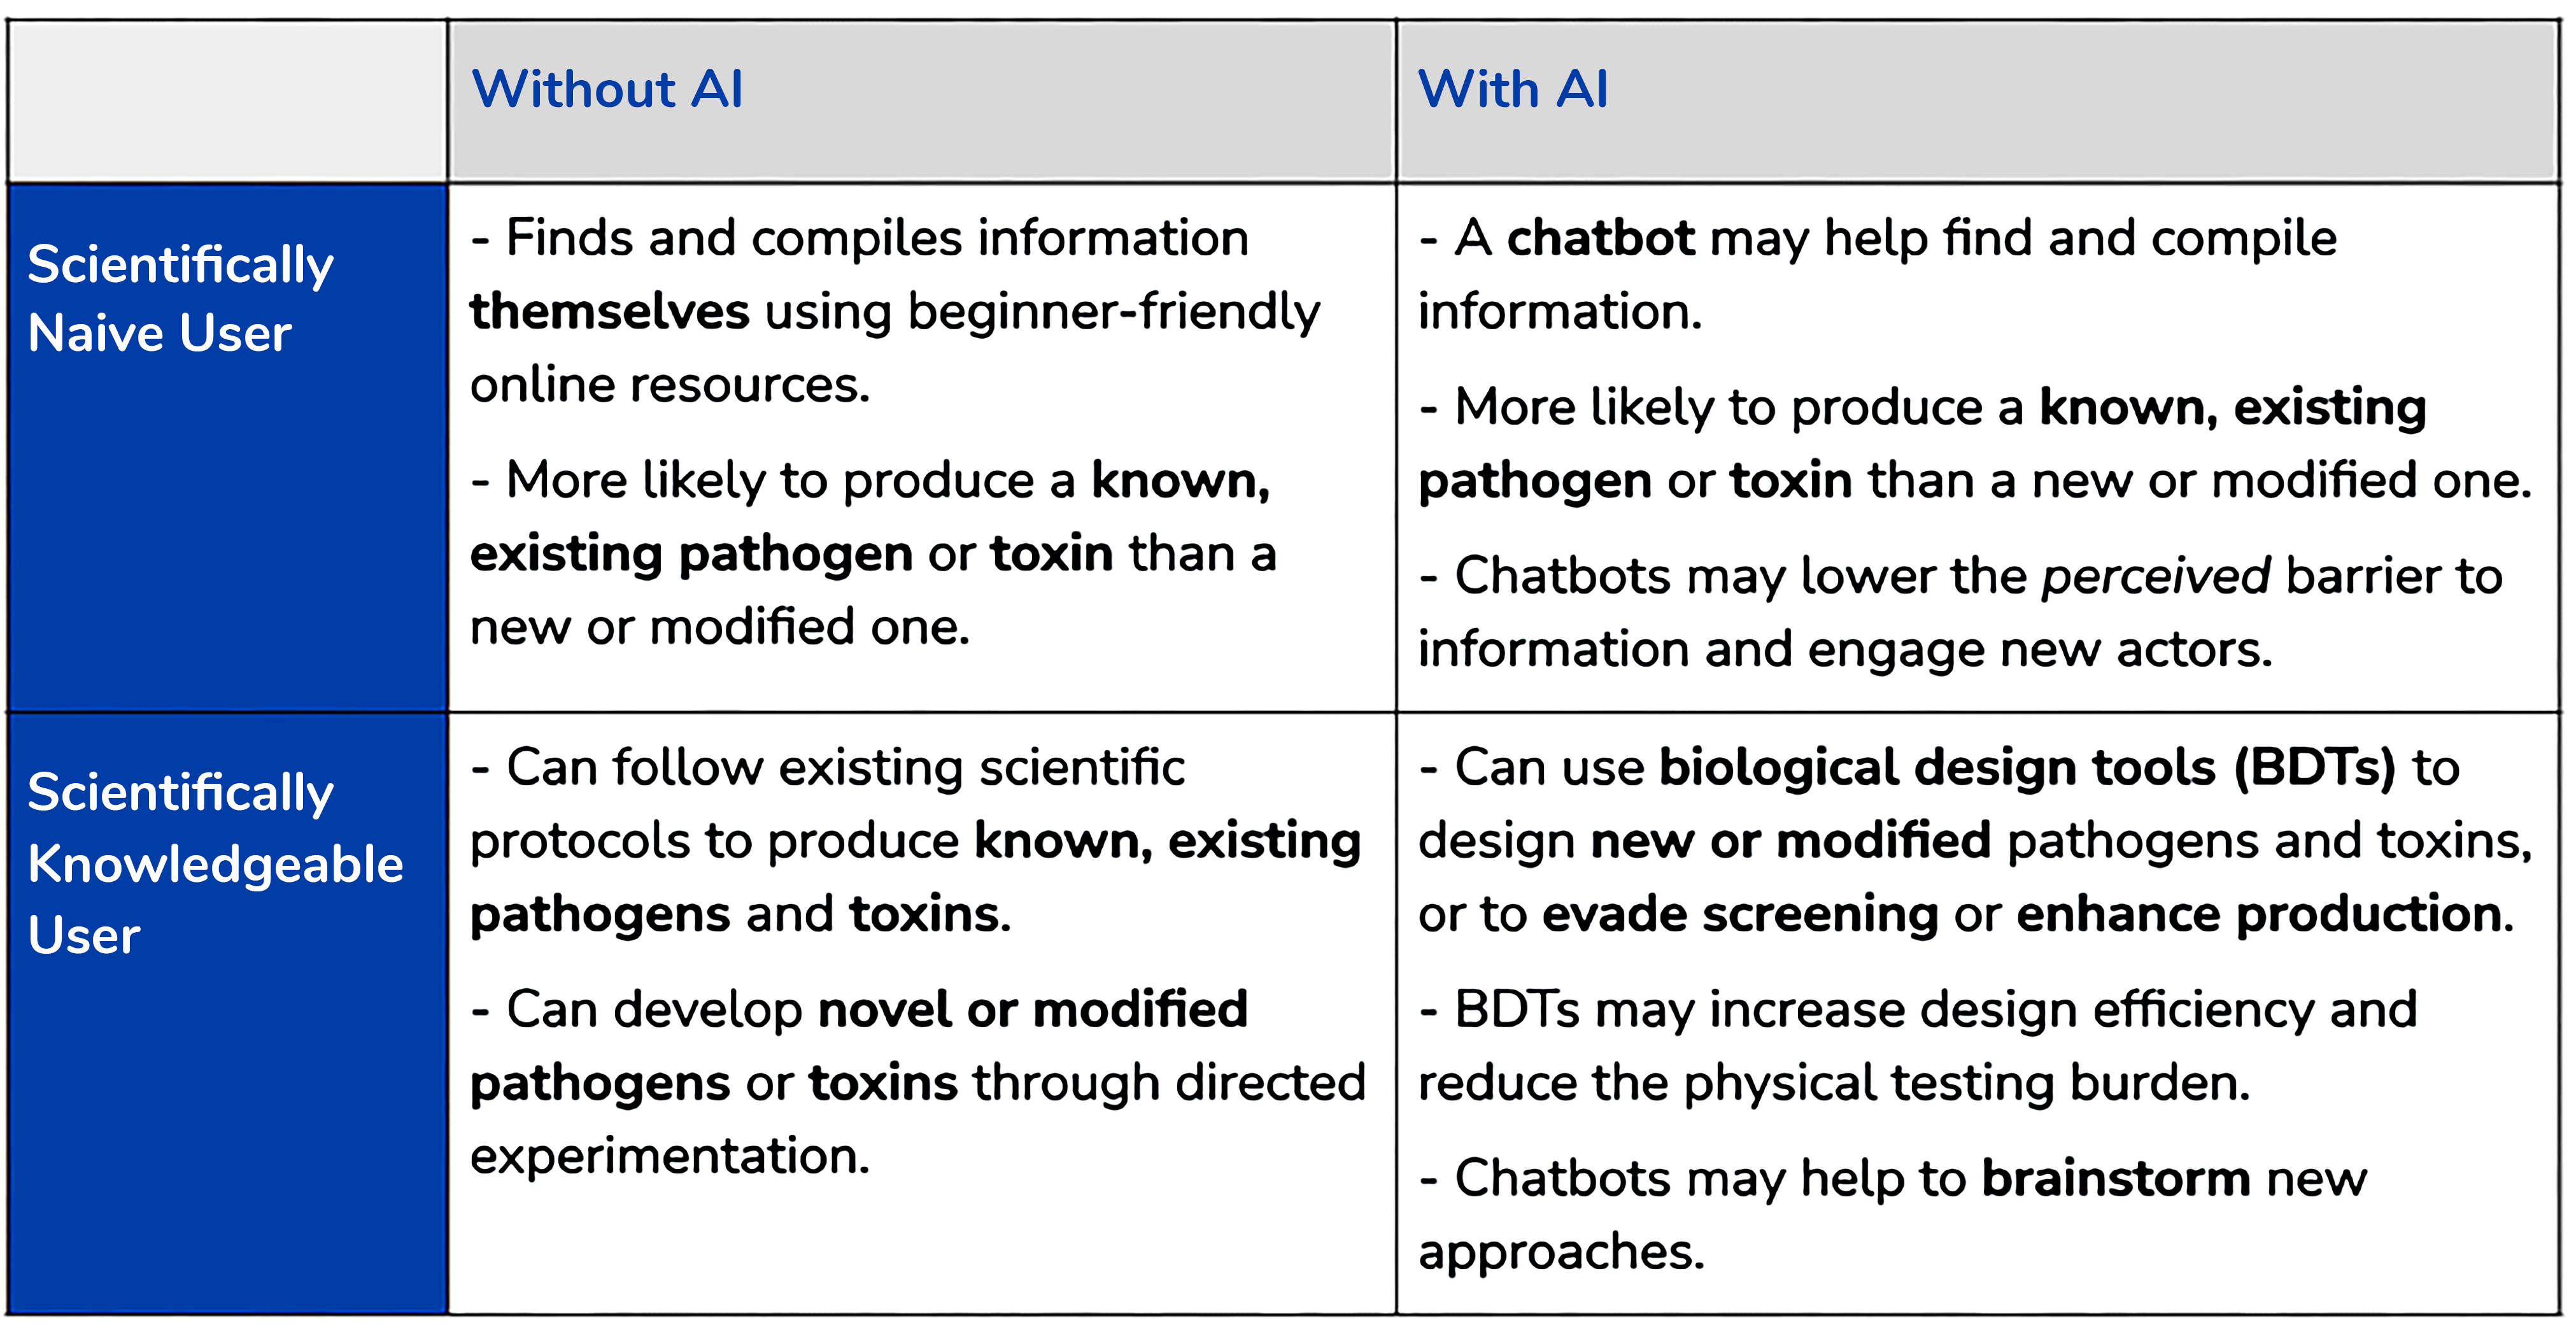 Table 1 from explainer. Shows a 2 by 2 table with column headings of "Without AI" and "With AI" and row headers of Scientifically Naive User and Scientifically Knowledgeable User. At the intersection of row and column, summarizes the kinds of activities that can occur. Full table contained in attached document